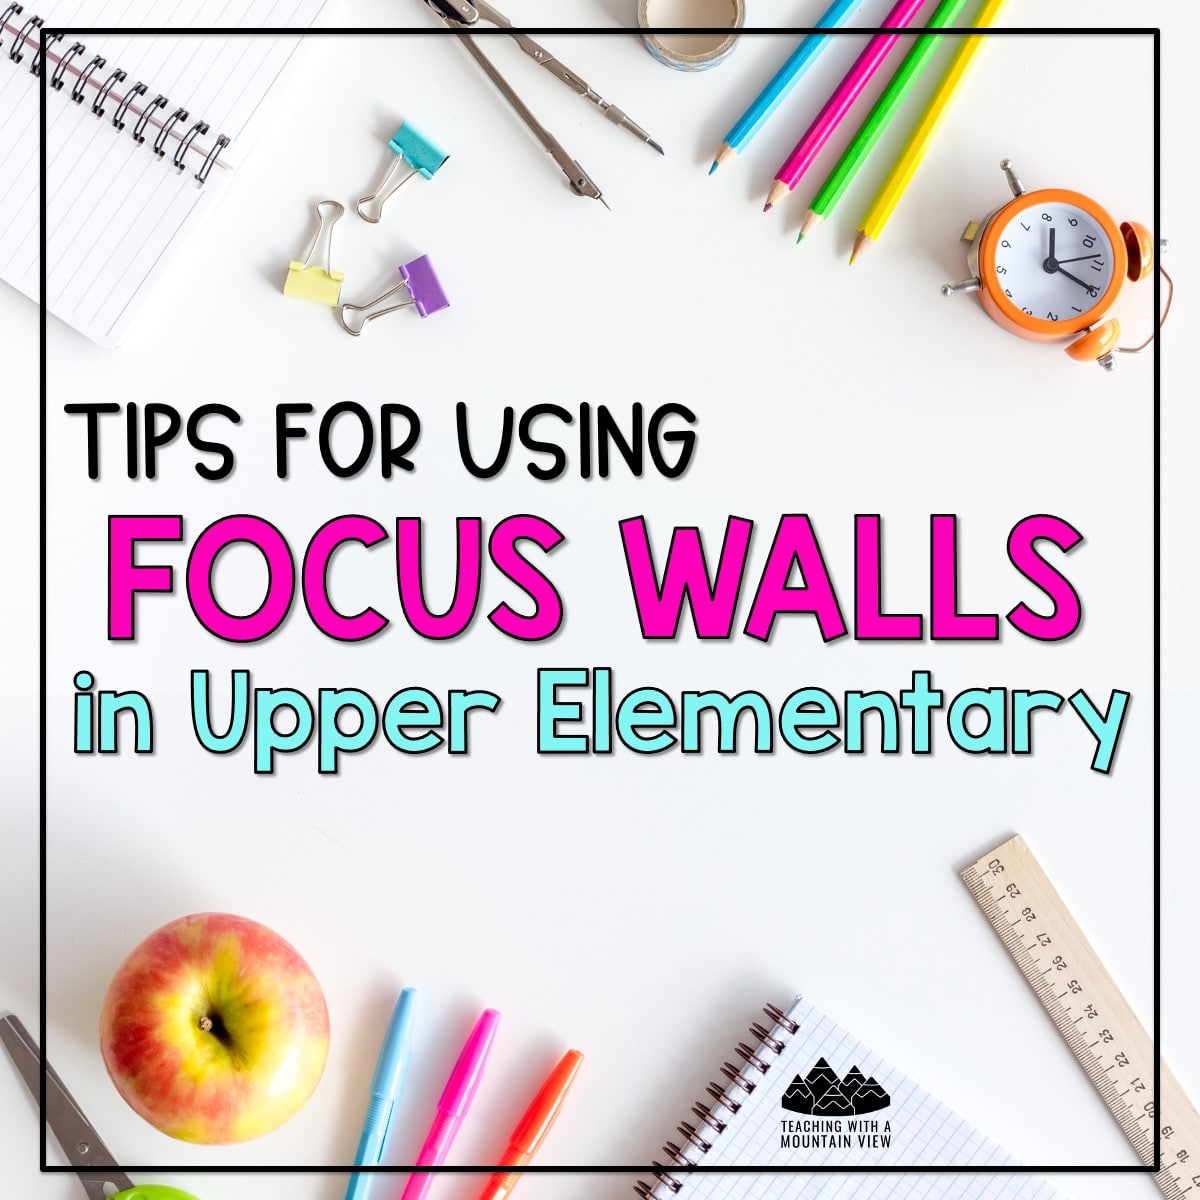 If you’re new to focus walls in upper elementary, think of them as a designated area where you’ll display key information and resources to support student learning.